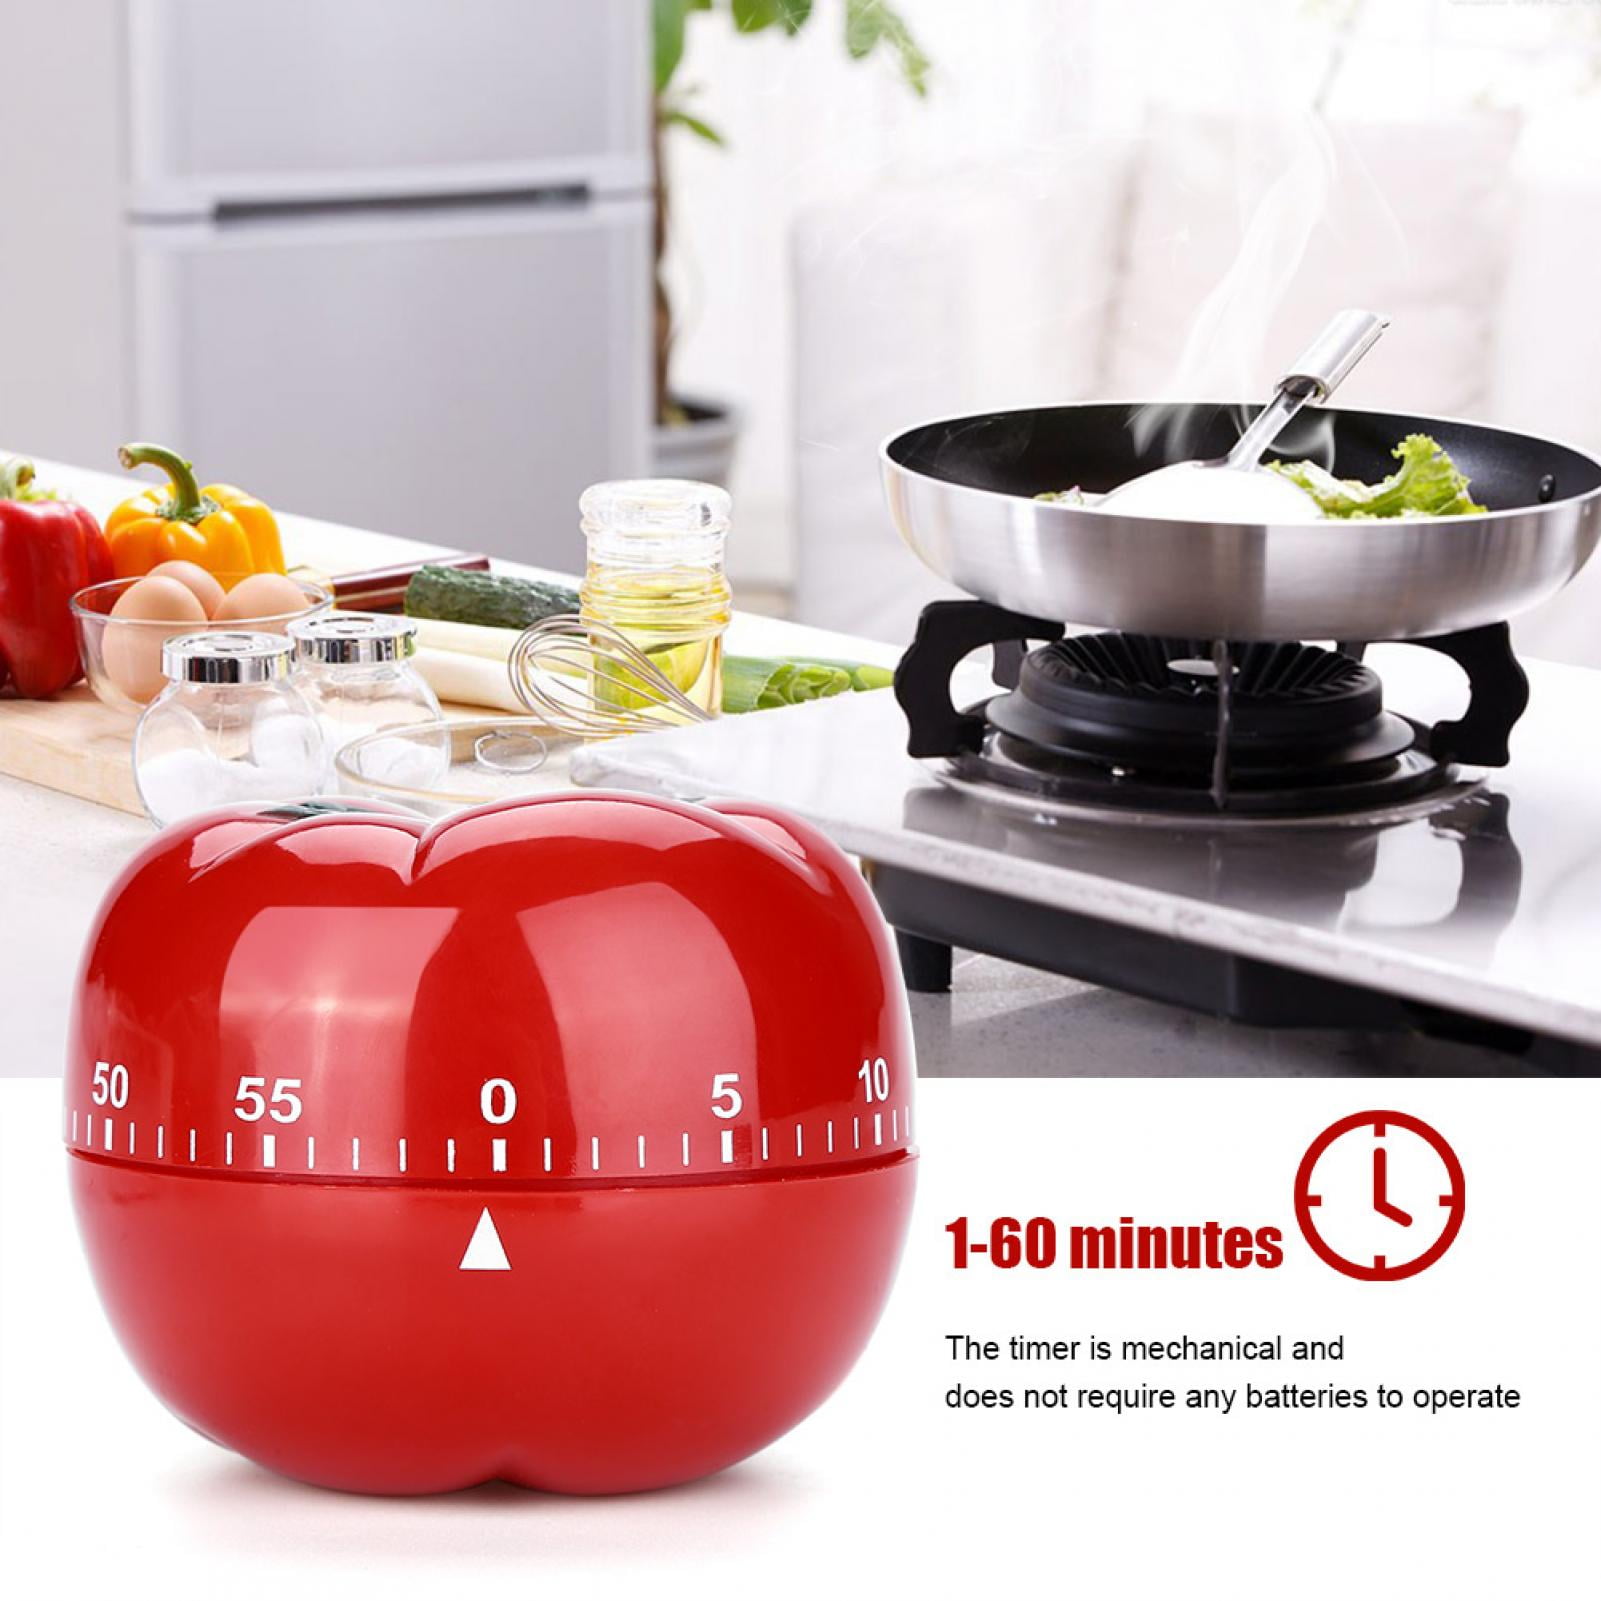 1xKitchen Tomato Shaped Timer 60 Minutes Cooking Mechanical Countdown A7Z8 E3Z5